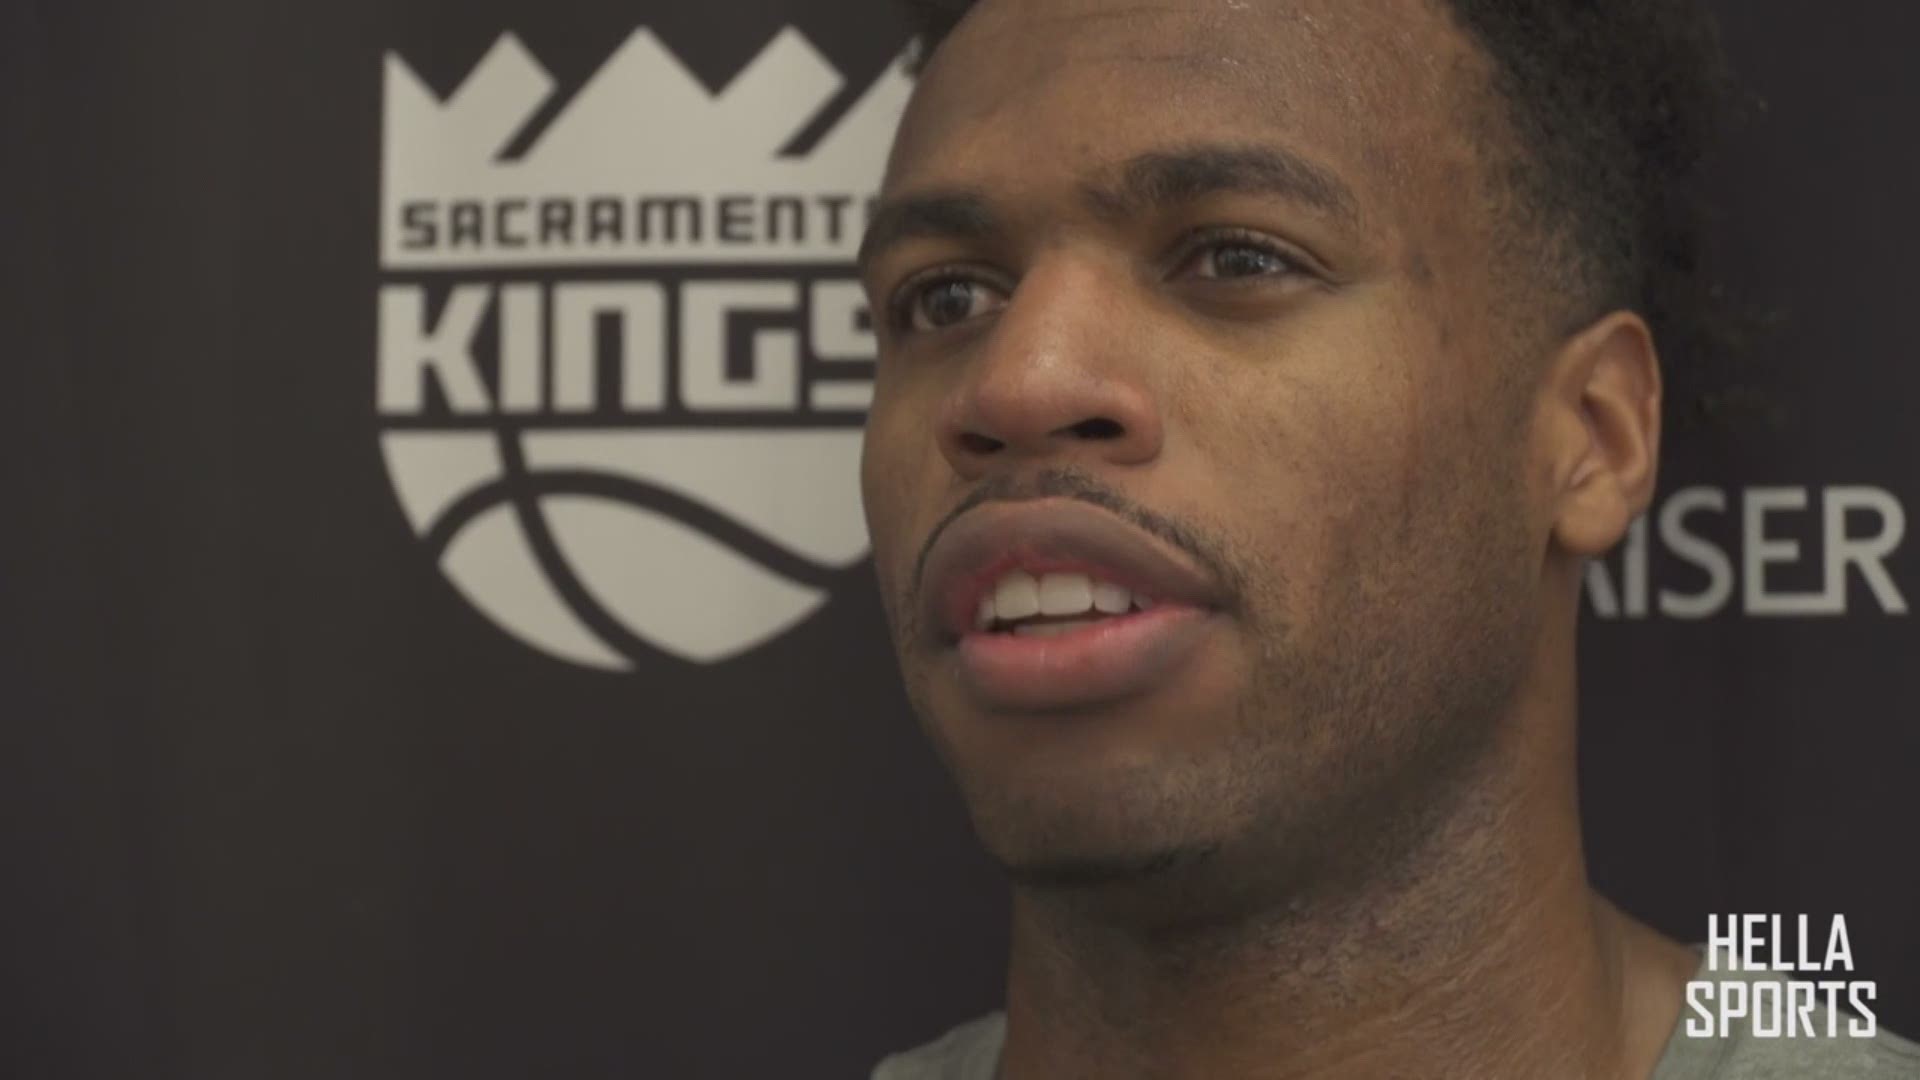 Sacramento Kings SG Buddy Hield talks about winning the three-point contest at All-Star Weekend in Chicago, defending the title and what he did with the trophy.